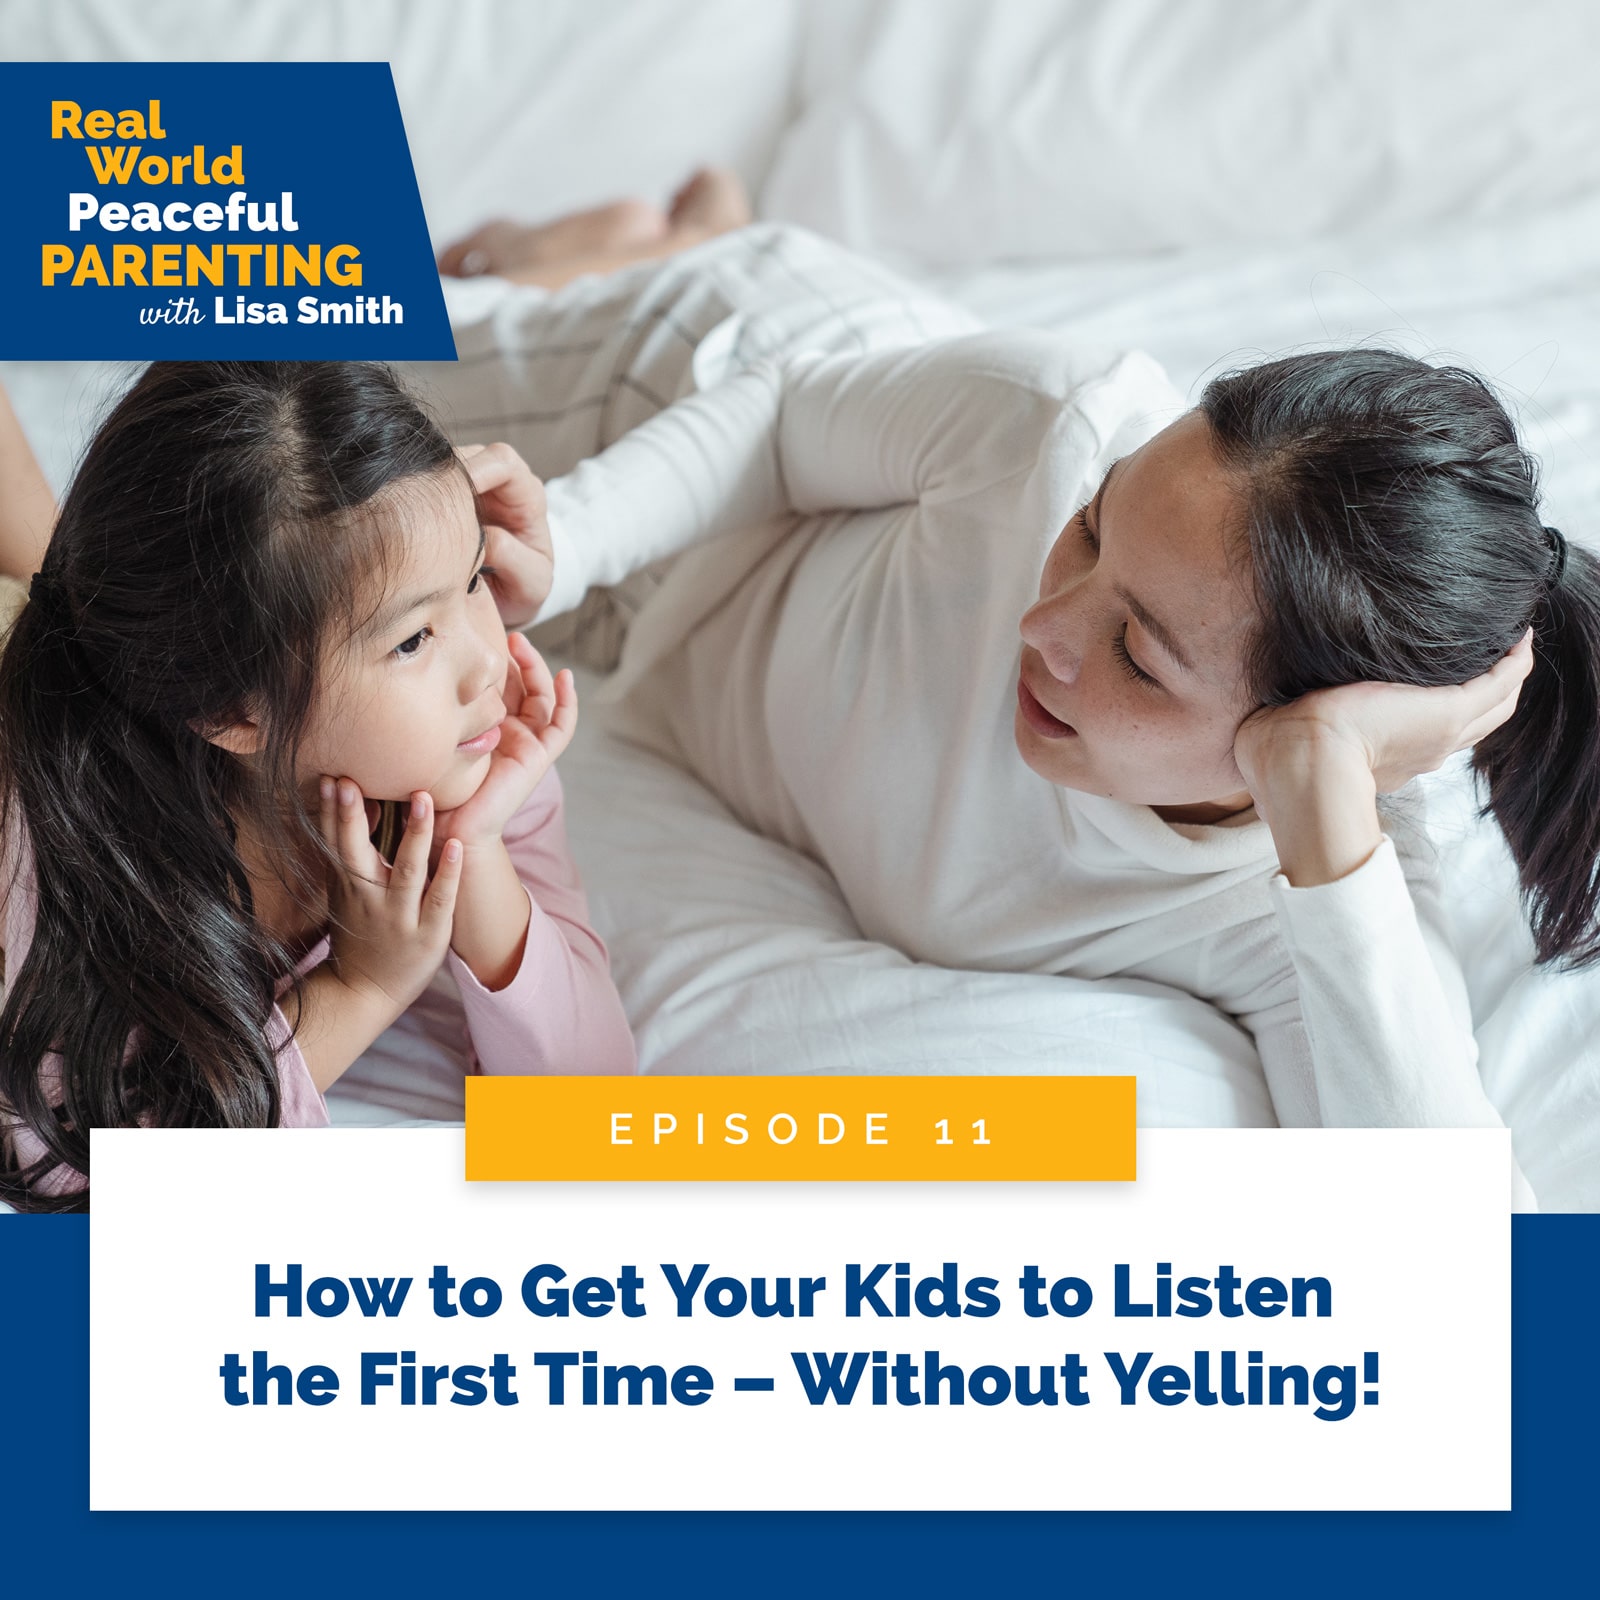 Real World Peaceful Parenting with Lisa Smith | How to Get Your Kids to Listen the First Time – Without Yelling!